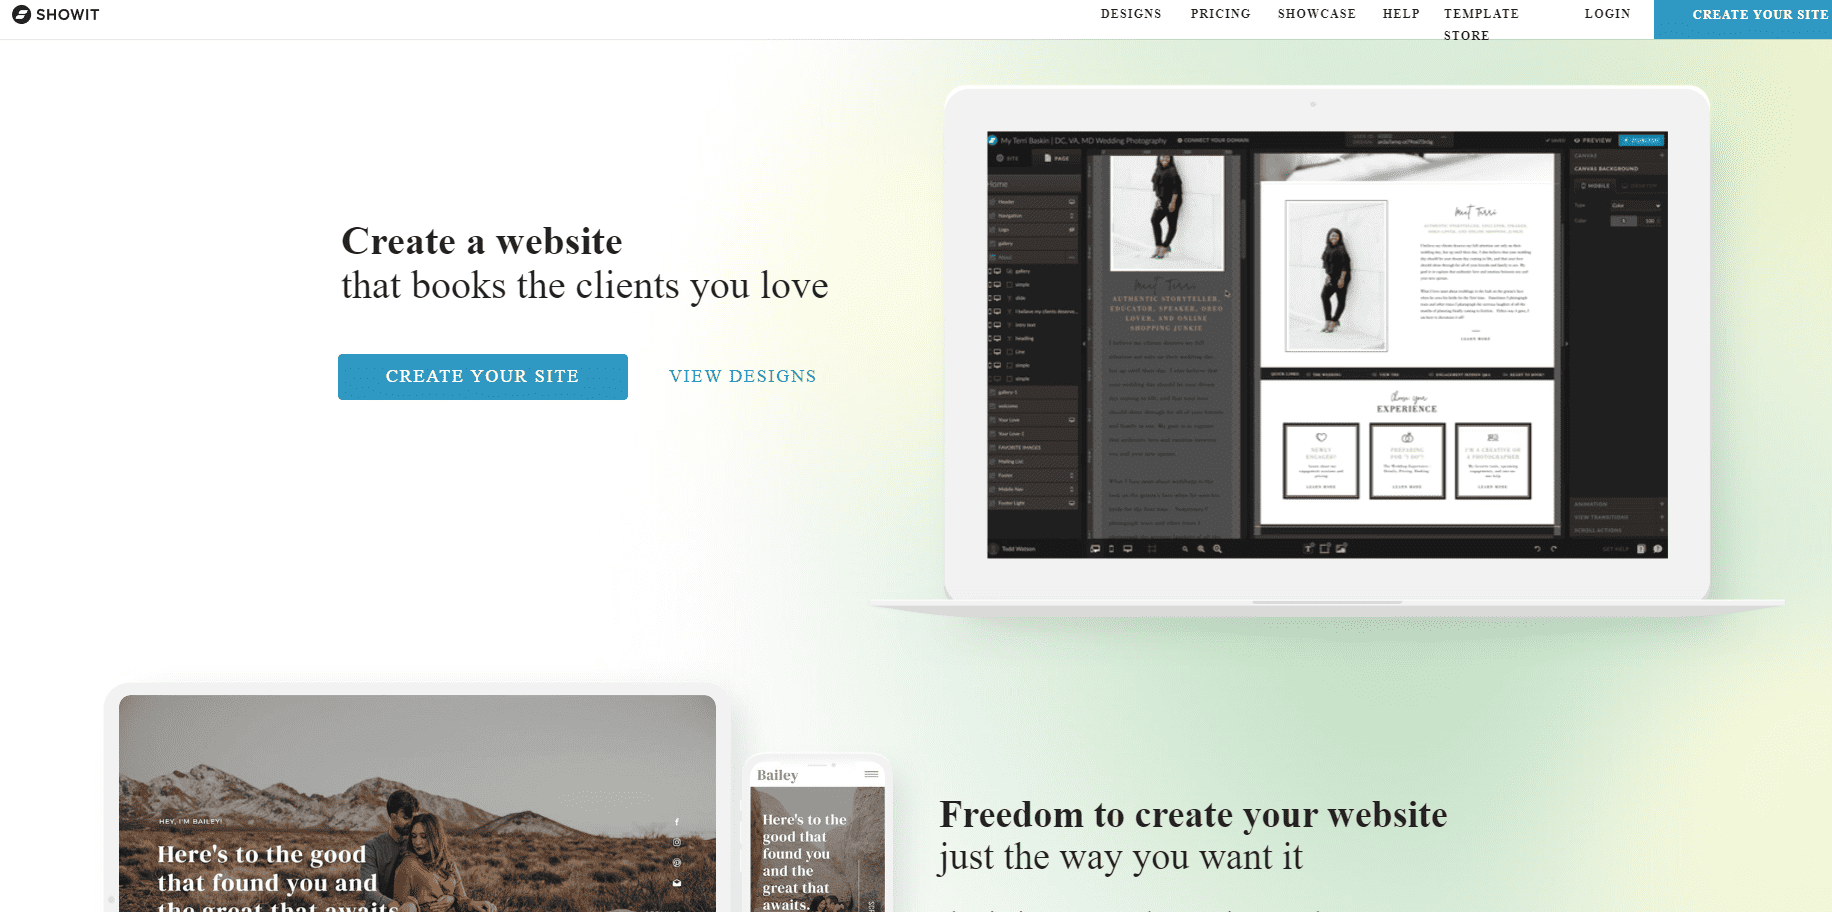 Showit.co is an online platform that helps businesses create beautiful websites.